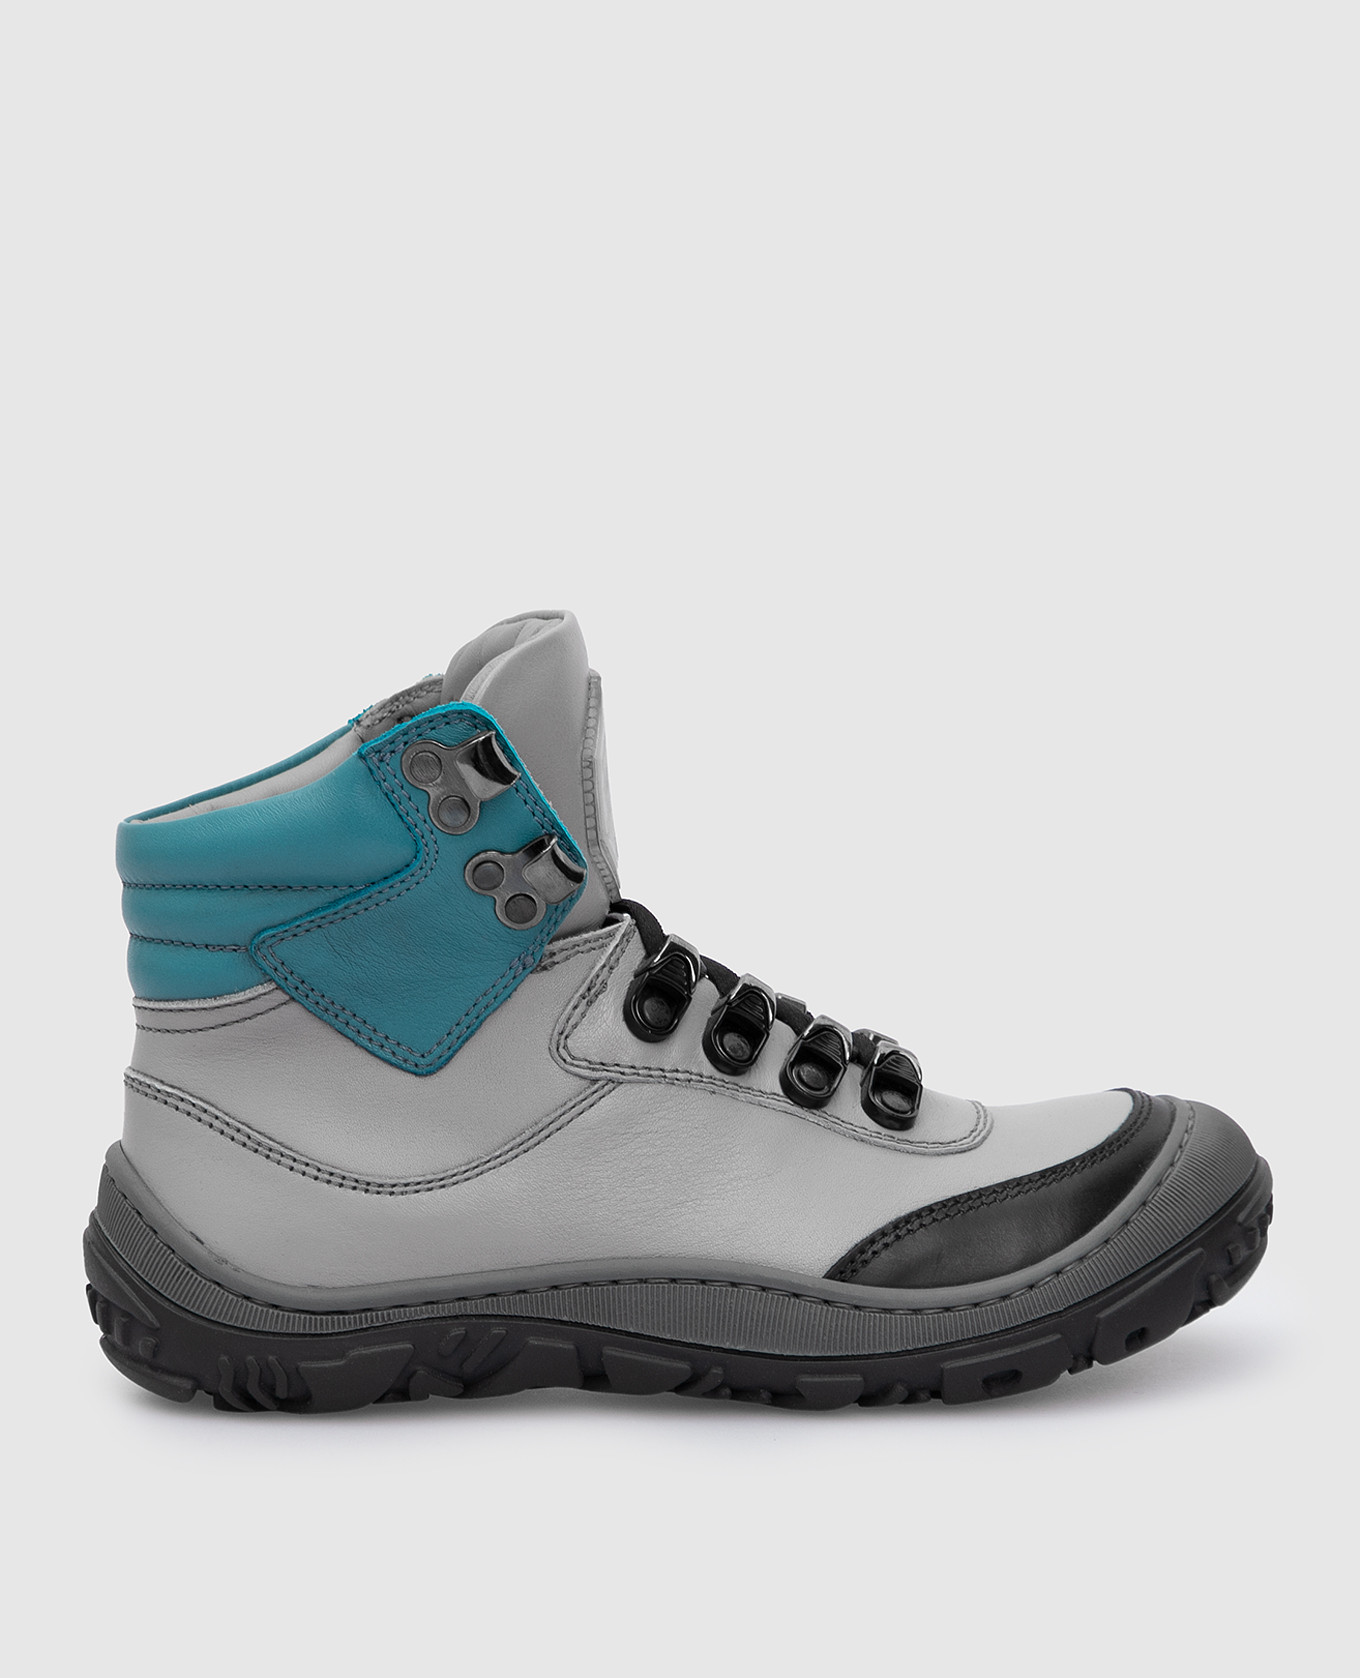 Children's gray leather boots